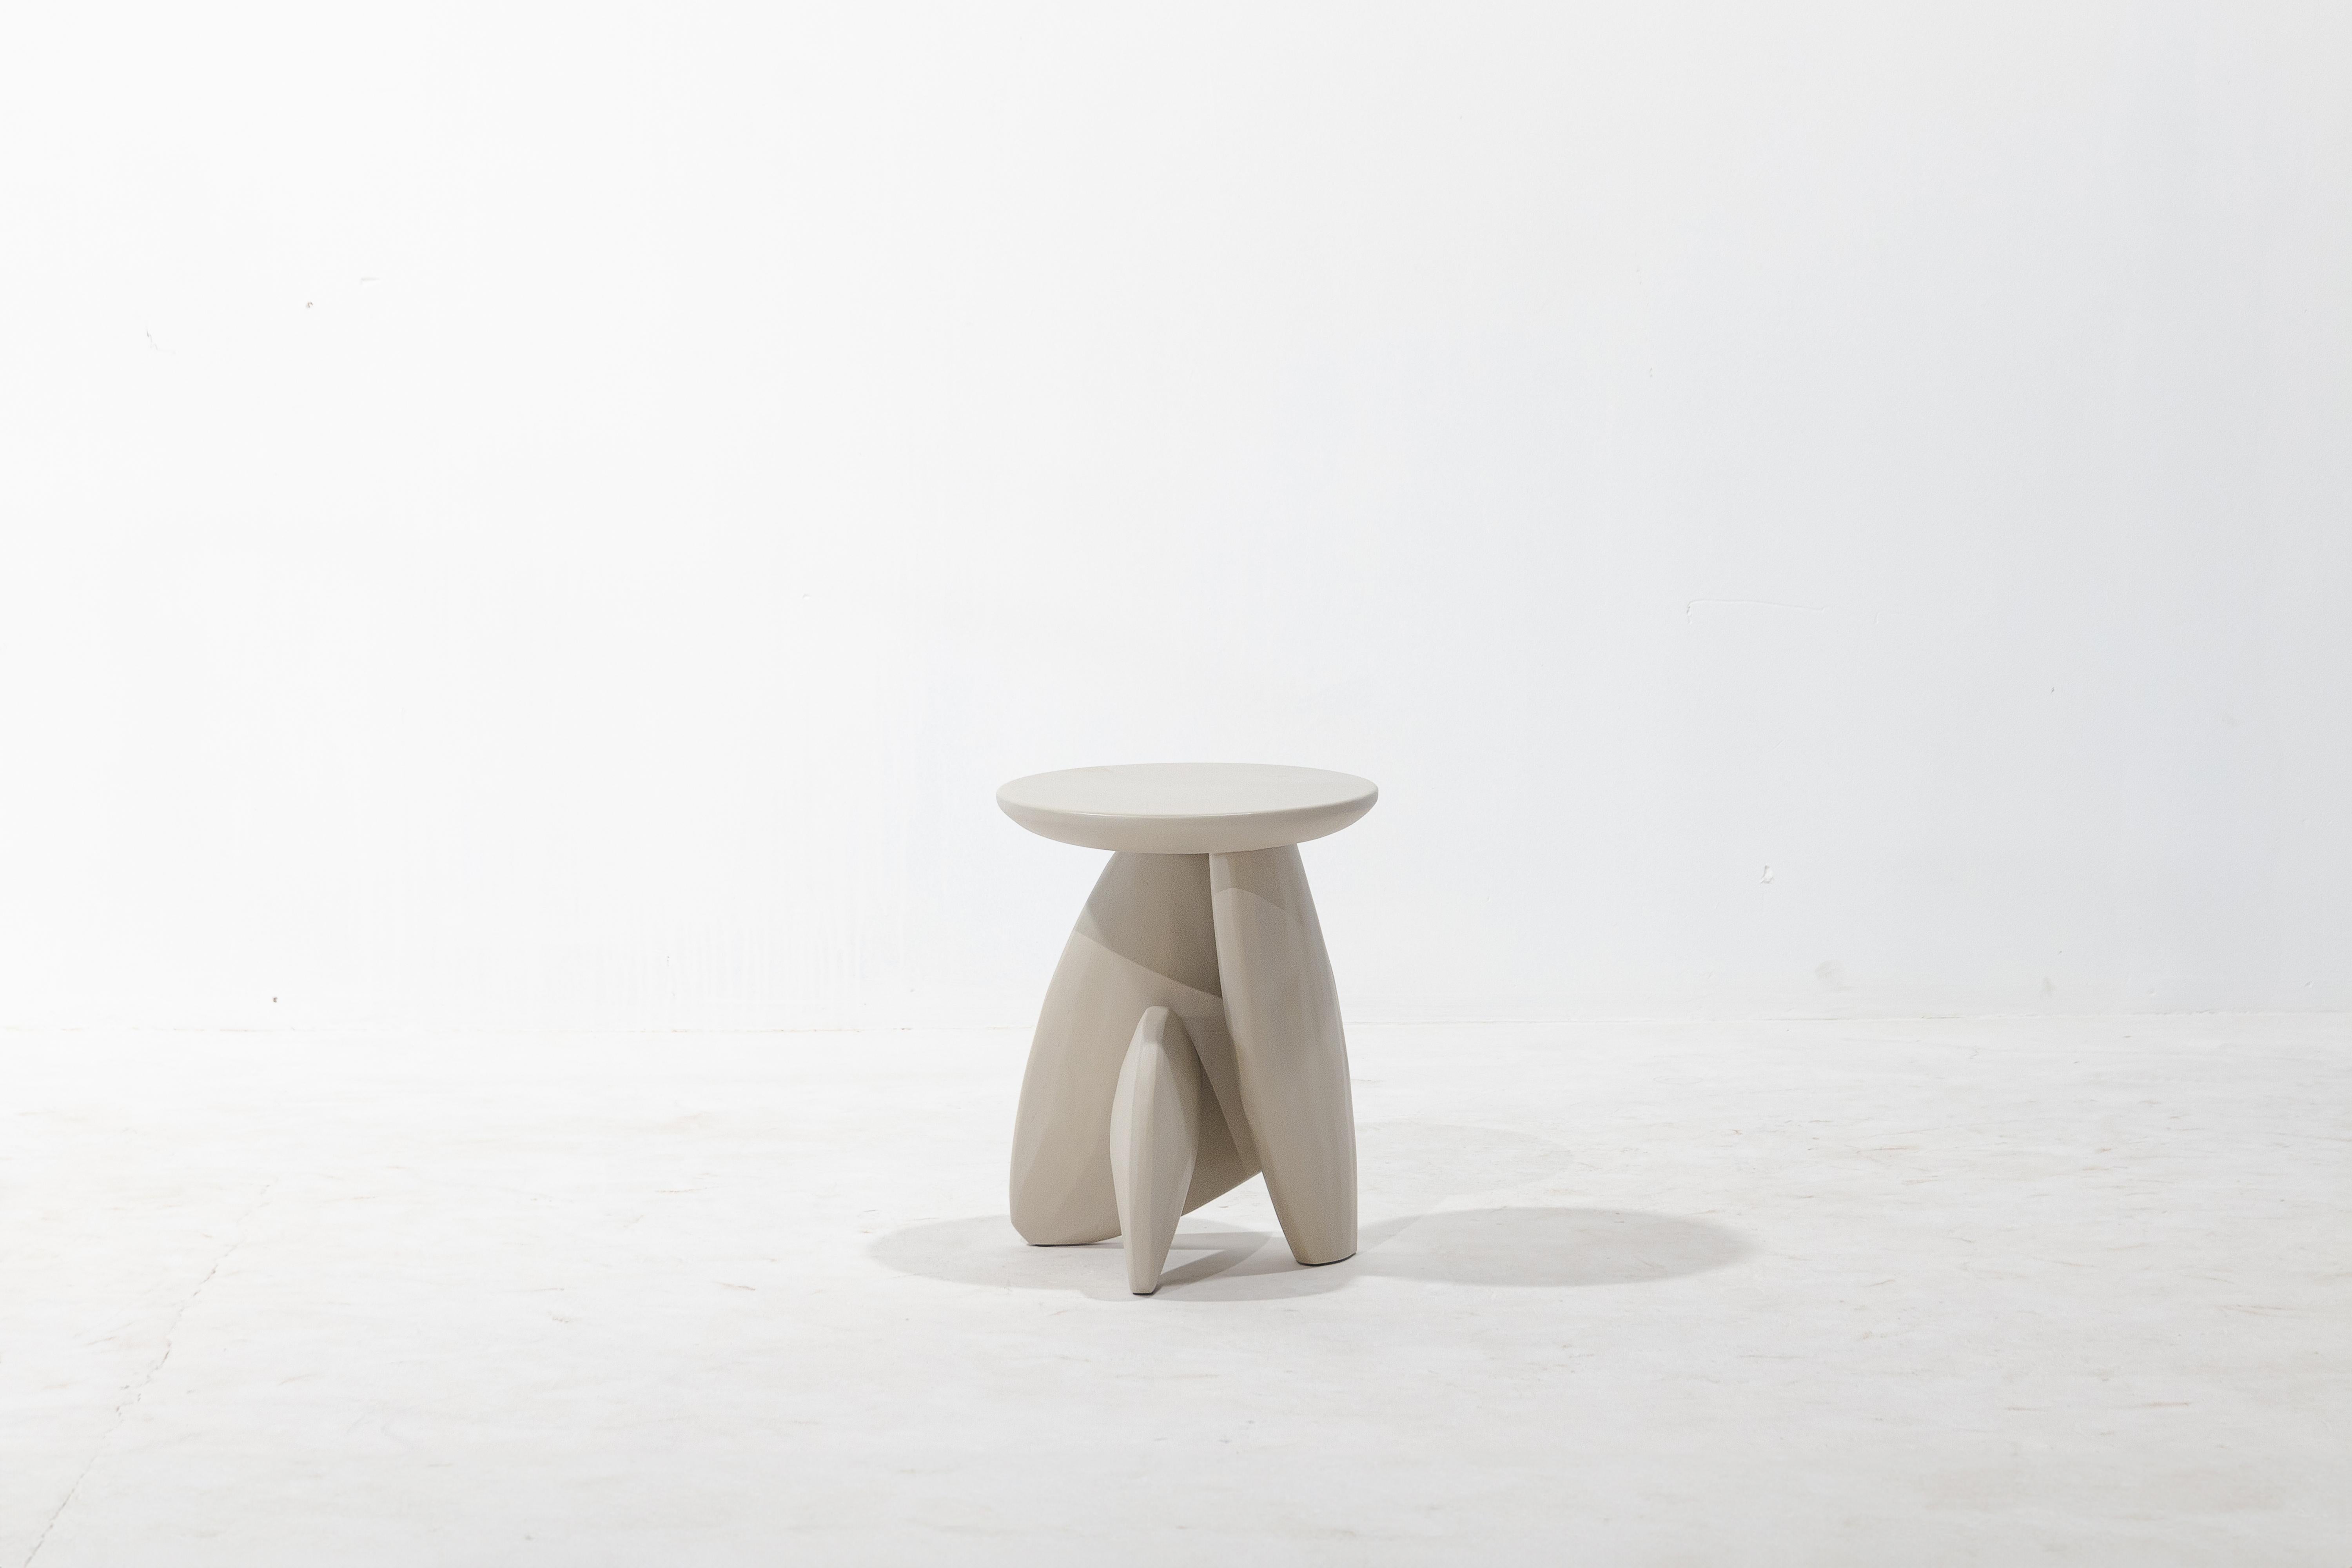 A three-legged wooden stool that looks like the arrangement of rock to form a structure. This work was born from the skill and instinct of a master craftsman where designers give the artisan a chance to create works without a clear plan until